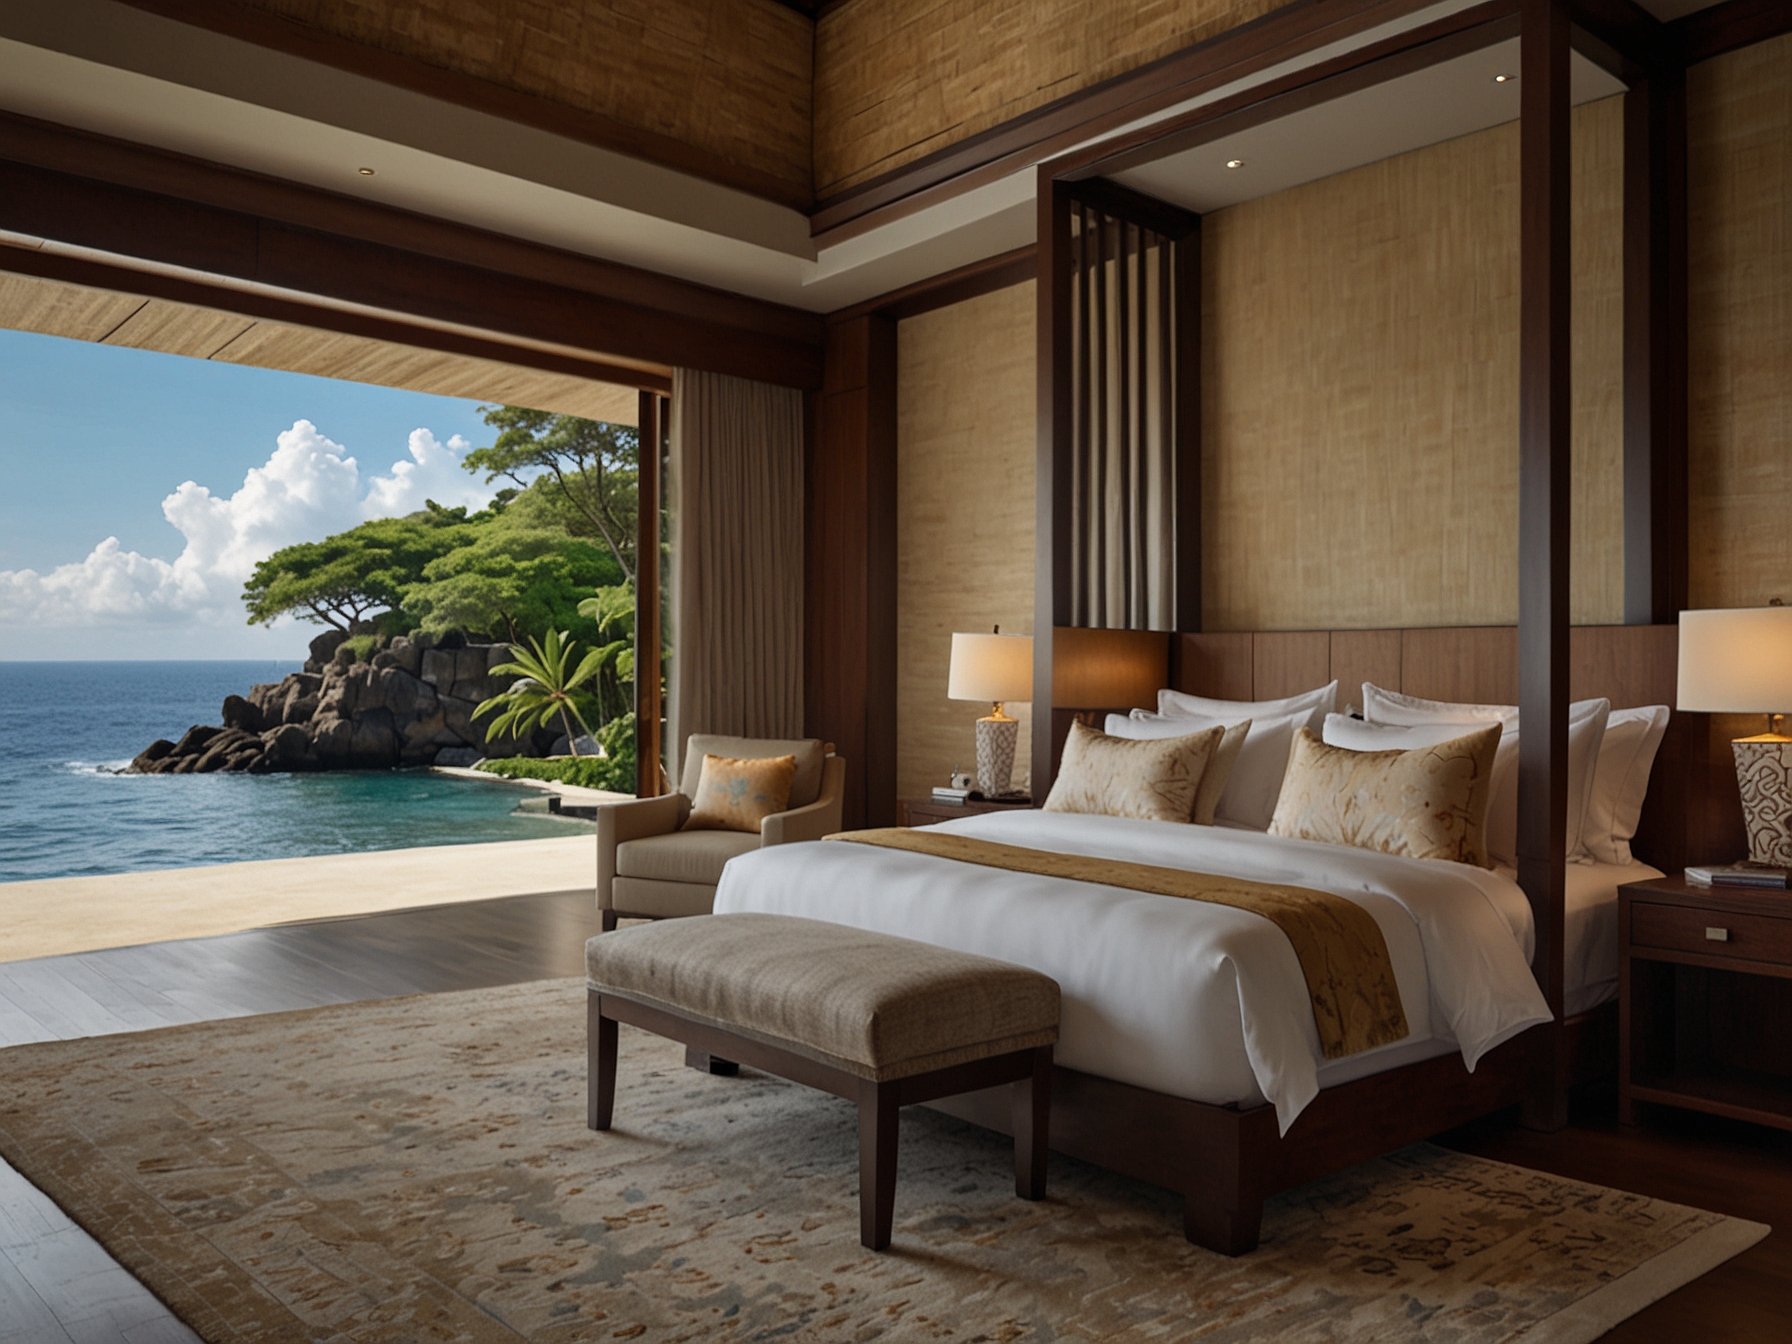 Elegant suites and villas at The Ritz-Carlton, Bali, offering breathtaking views of the Indian Ocean, showcasing the resort's commitment to unparalleled guest experiences and luxury accommodations.